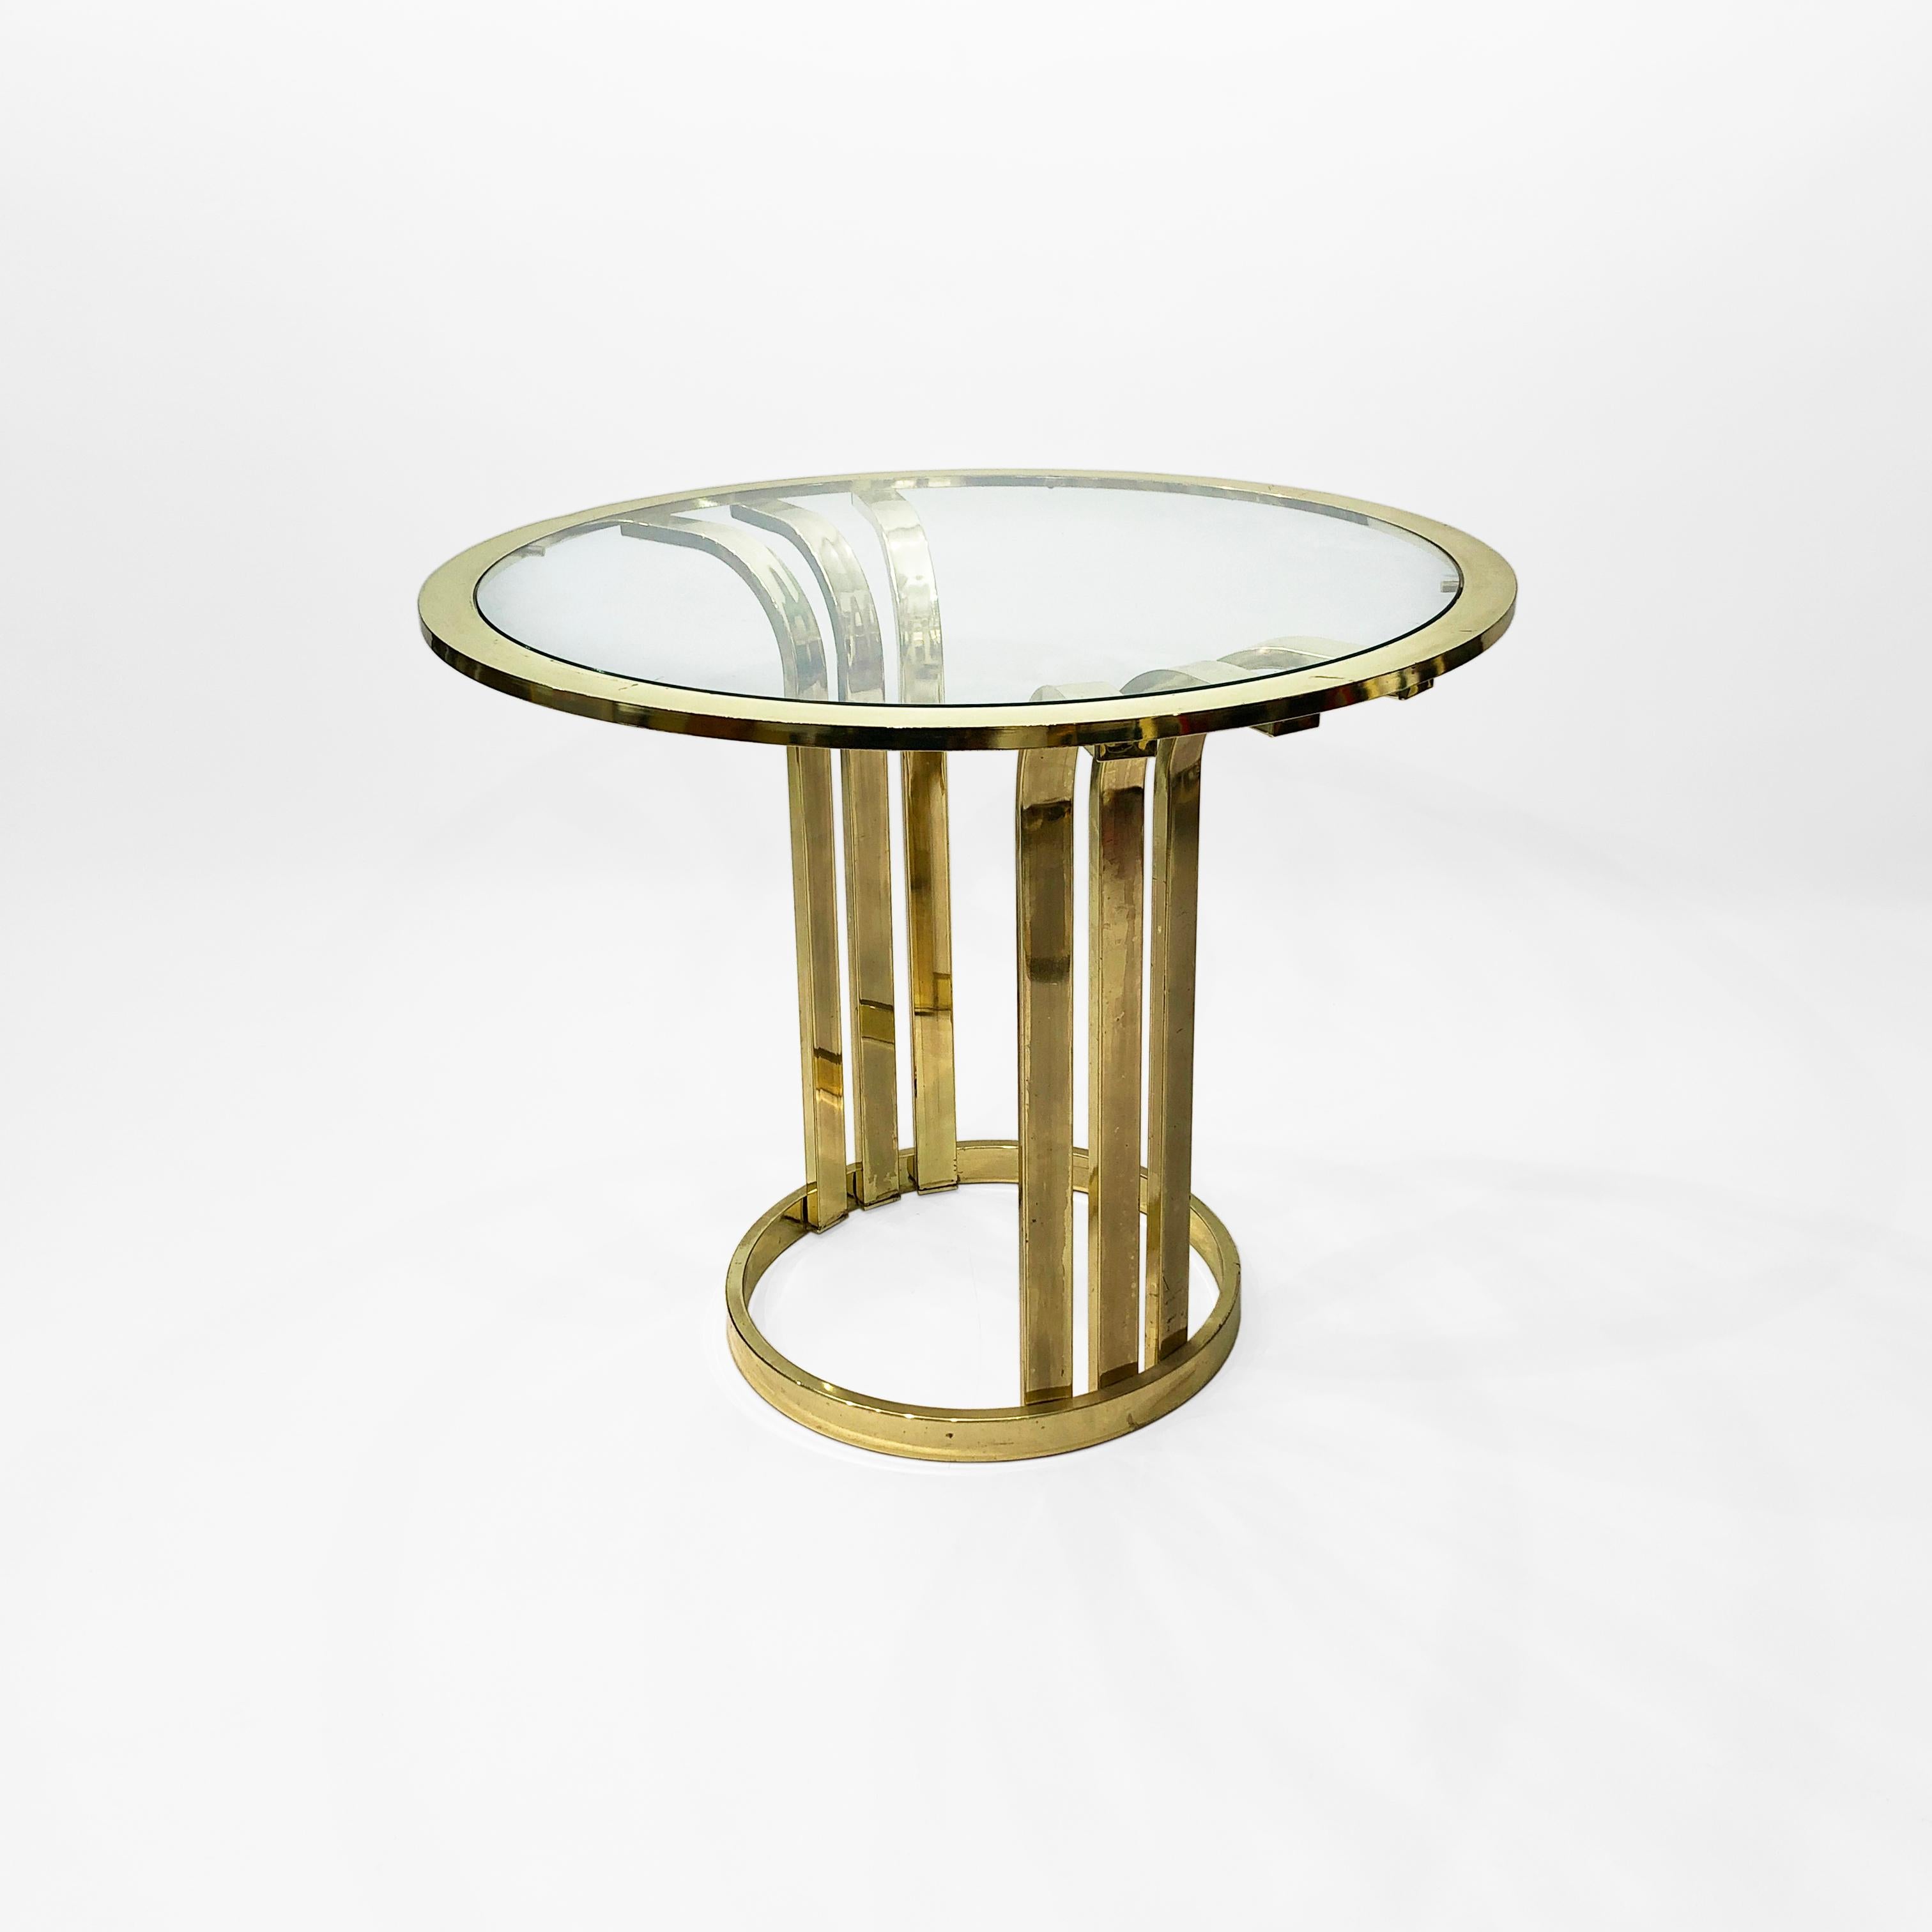 An elegant Art Deco-inspired side or entryway table, consisting of an organic, curved goblet shaped brass-plated frame, supporting a pane of circular glass at the top. The three-winged form of the base is very reminiscent of the 1930s – but this